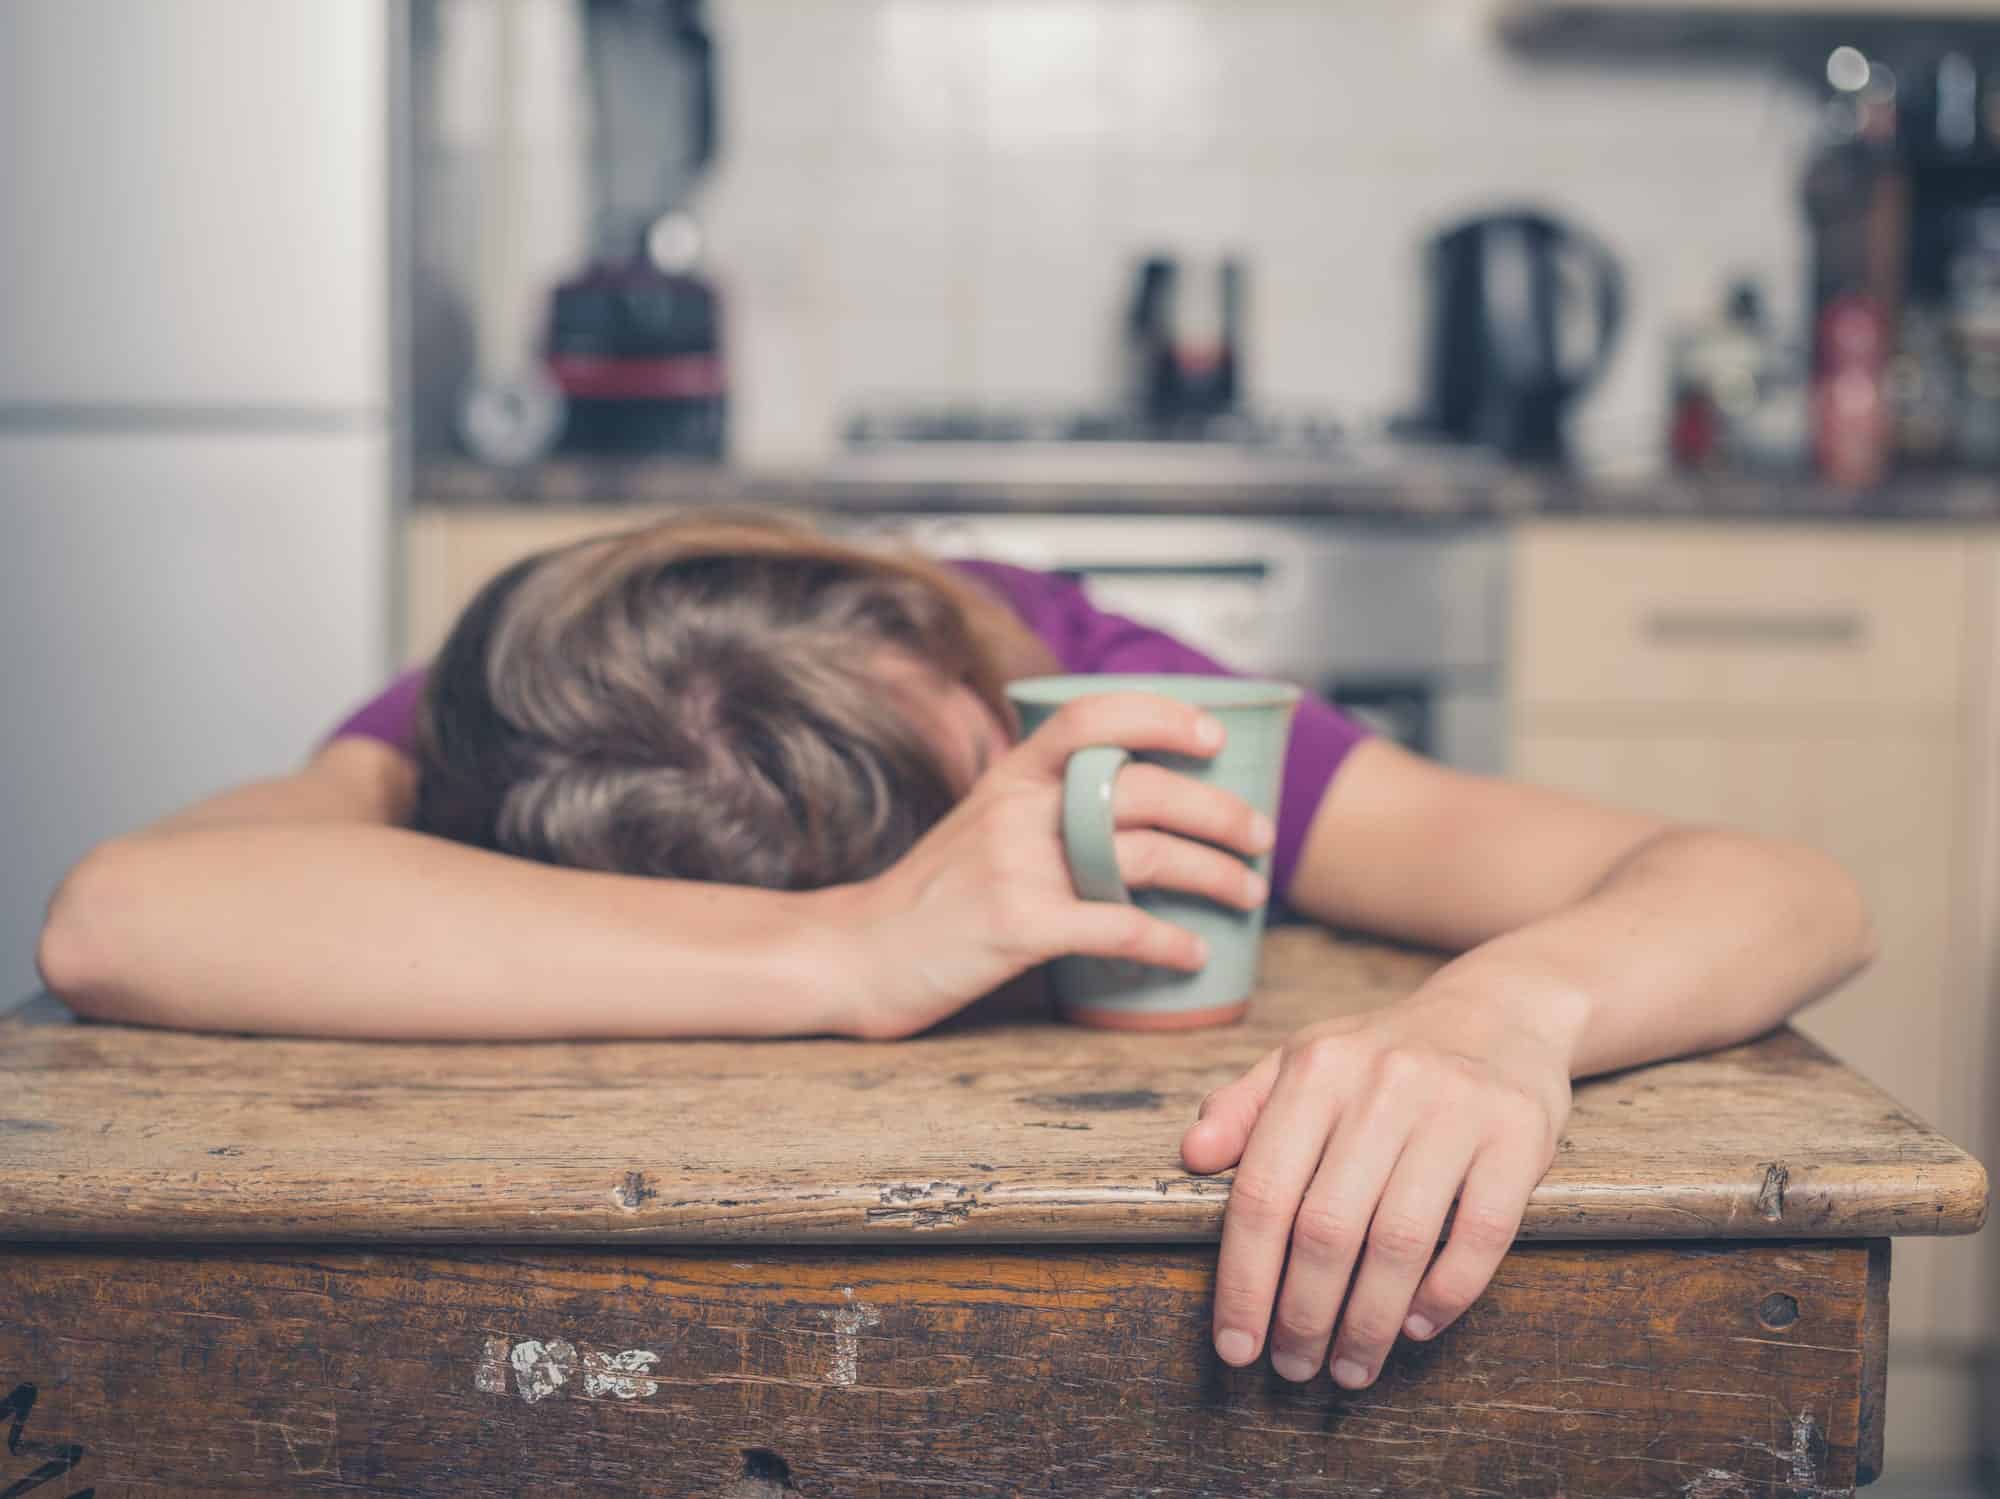 3 Reasons Why Power Naps Make You More Productive